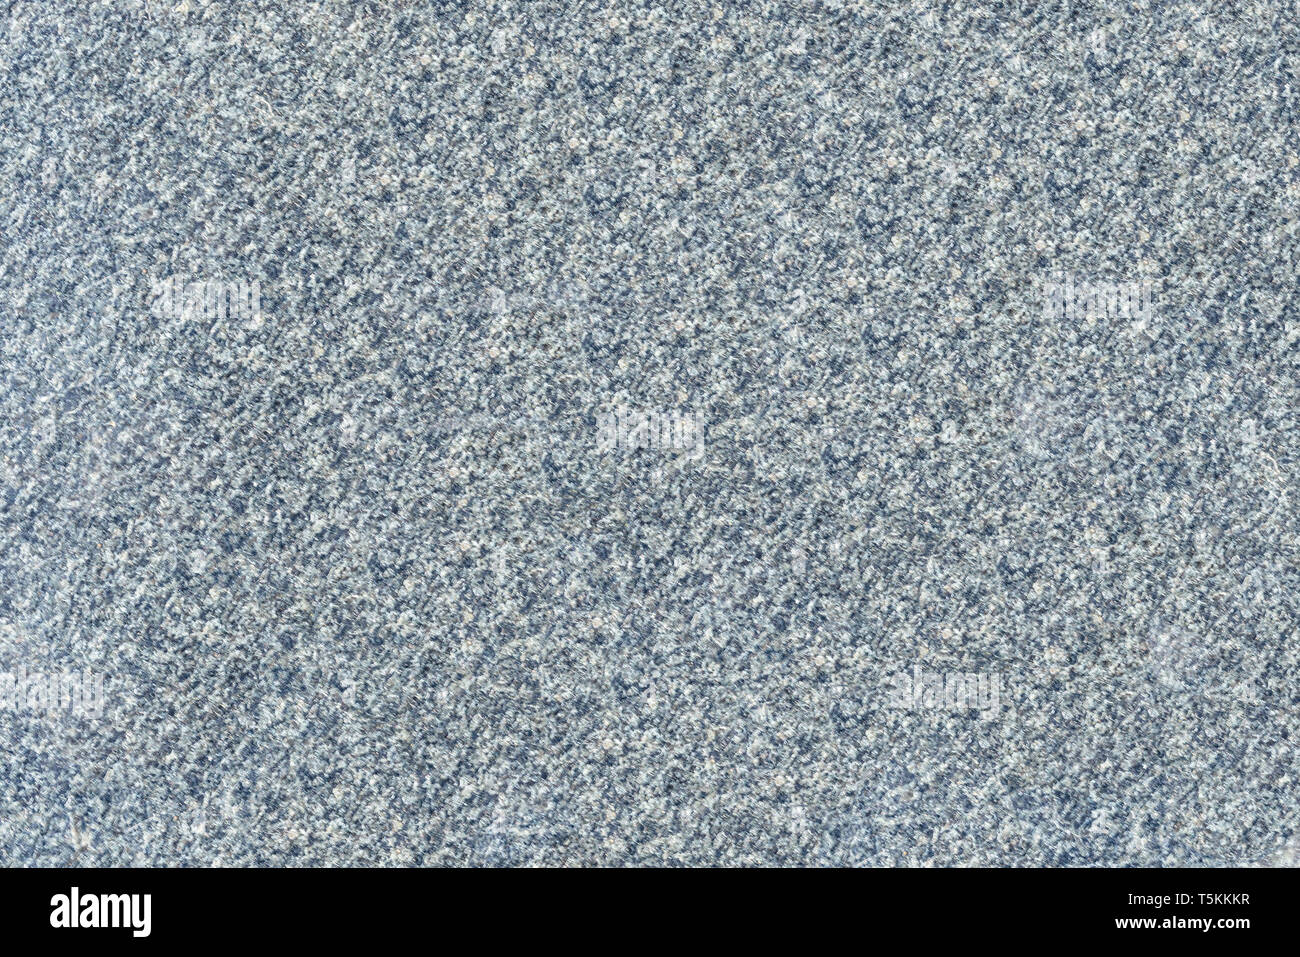 Wall stone texture as background made of real marble, granite. Overhead view, flat lay. Stock Photo